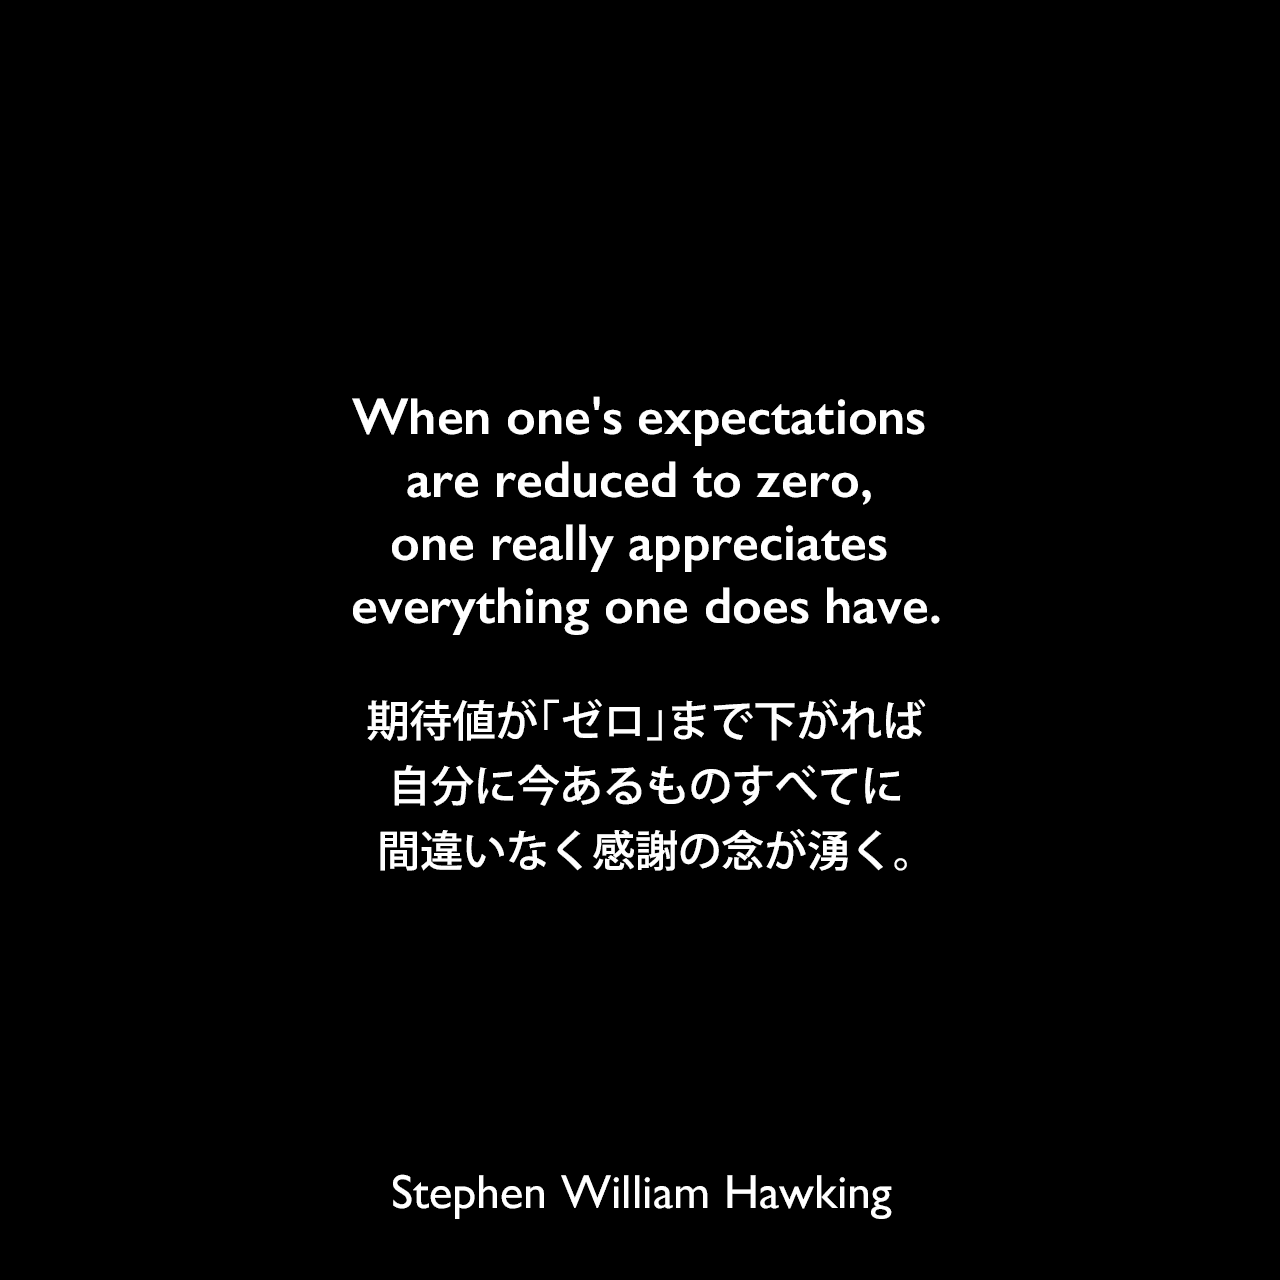 When one's expectations are reduced to zero, one really appreciates everything one does have.期待値が「ゼロ」まで下がれば、自分に今あるものすべてに間違いなく感謝の念が湧く。Stephen William Hawking